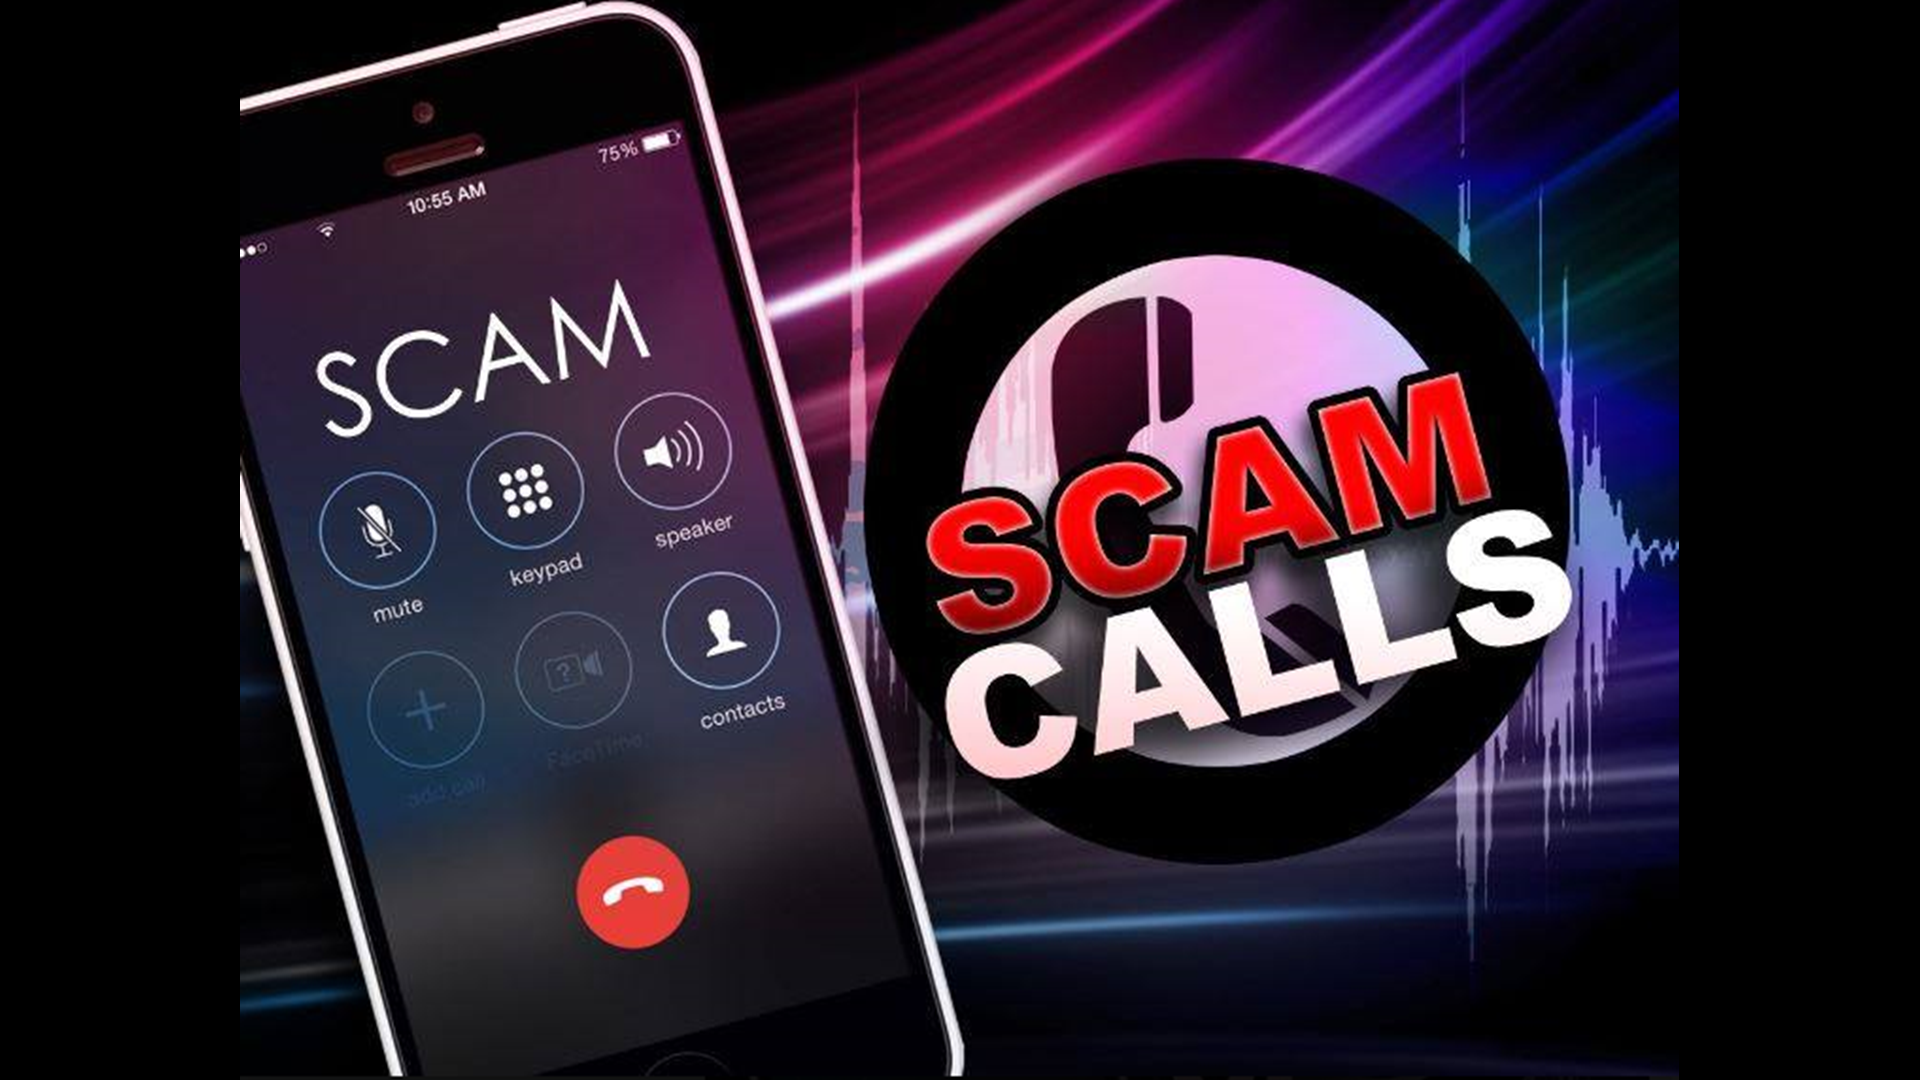 Police are warning the public after a caller claiming to be a Robinson police officer told residents all of their assets would be frozen if they didn't pay up.